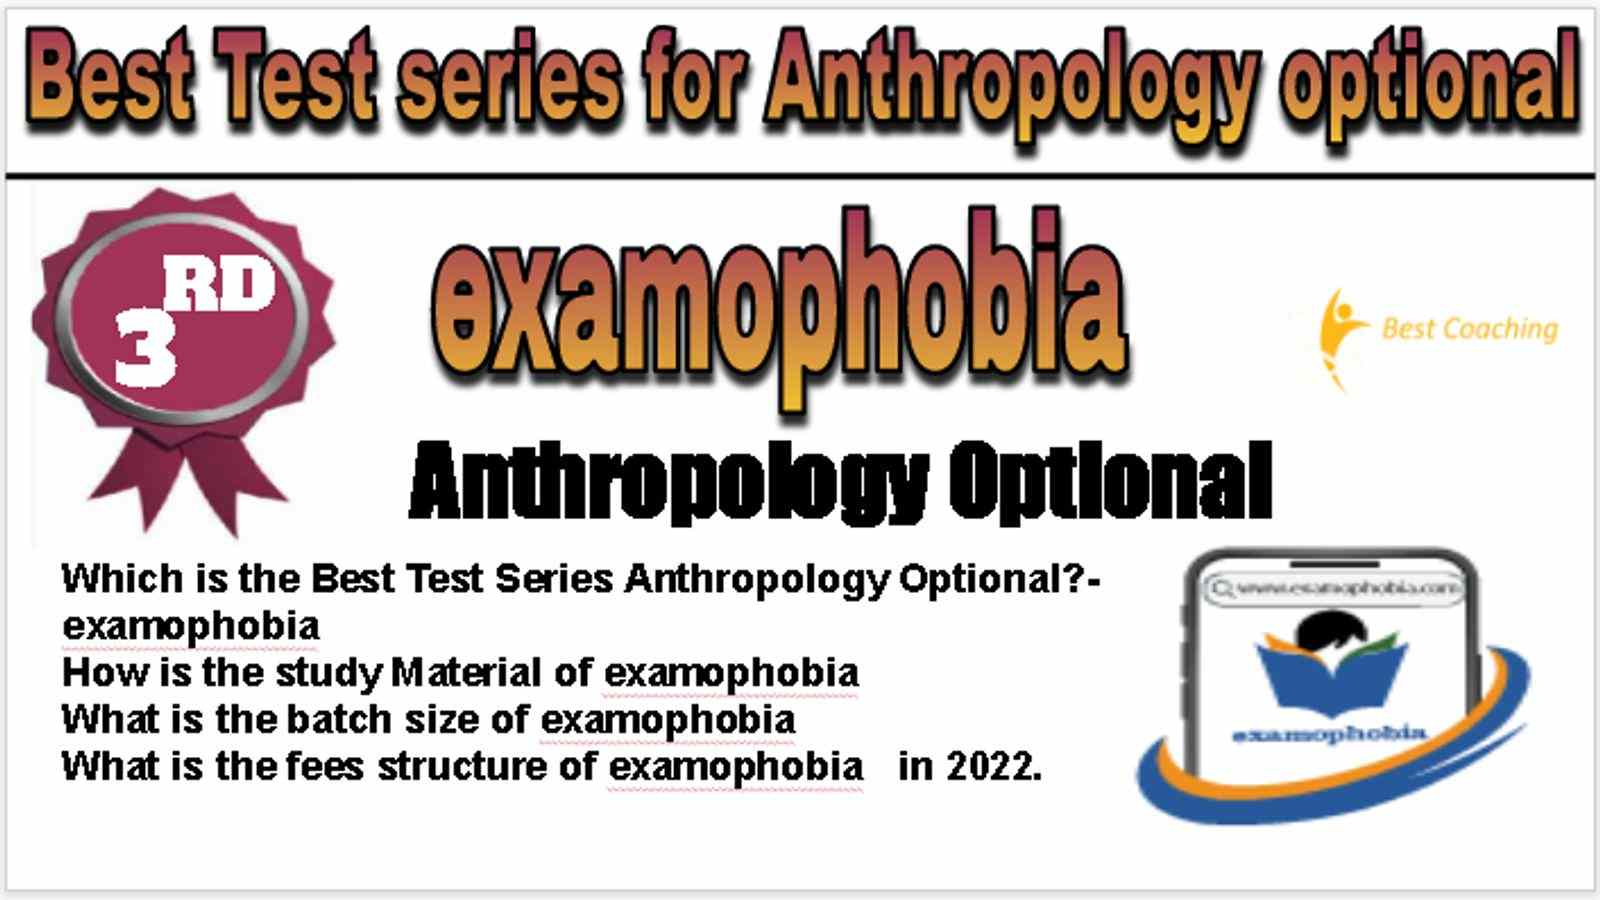 Rank 3 Best Test series for Anthropology optional